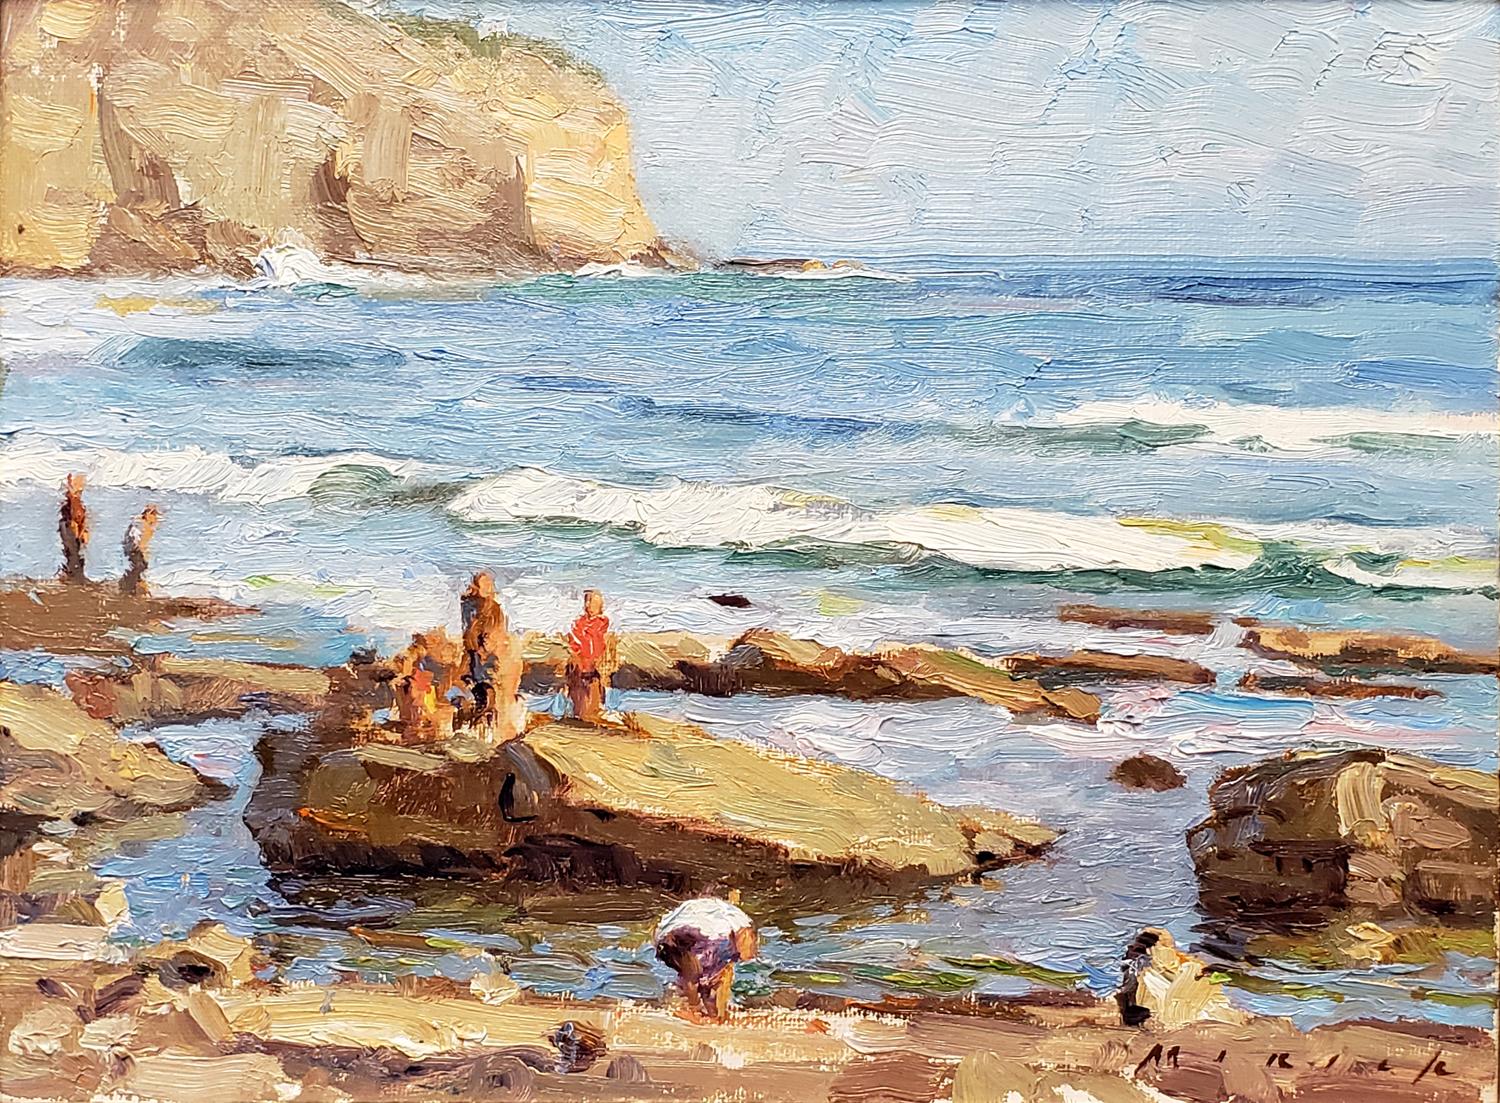 A Saturday Afternoon at the Tide Pools - Painting by Stephen Mirich